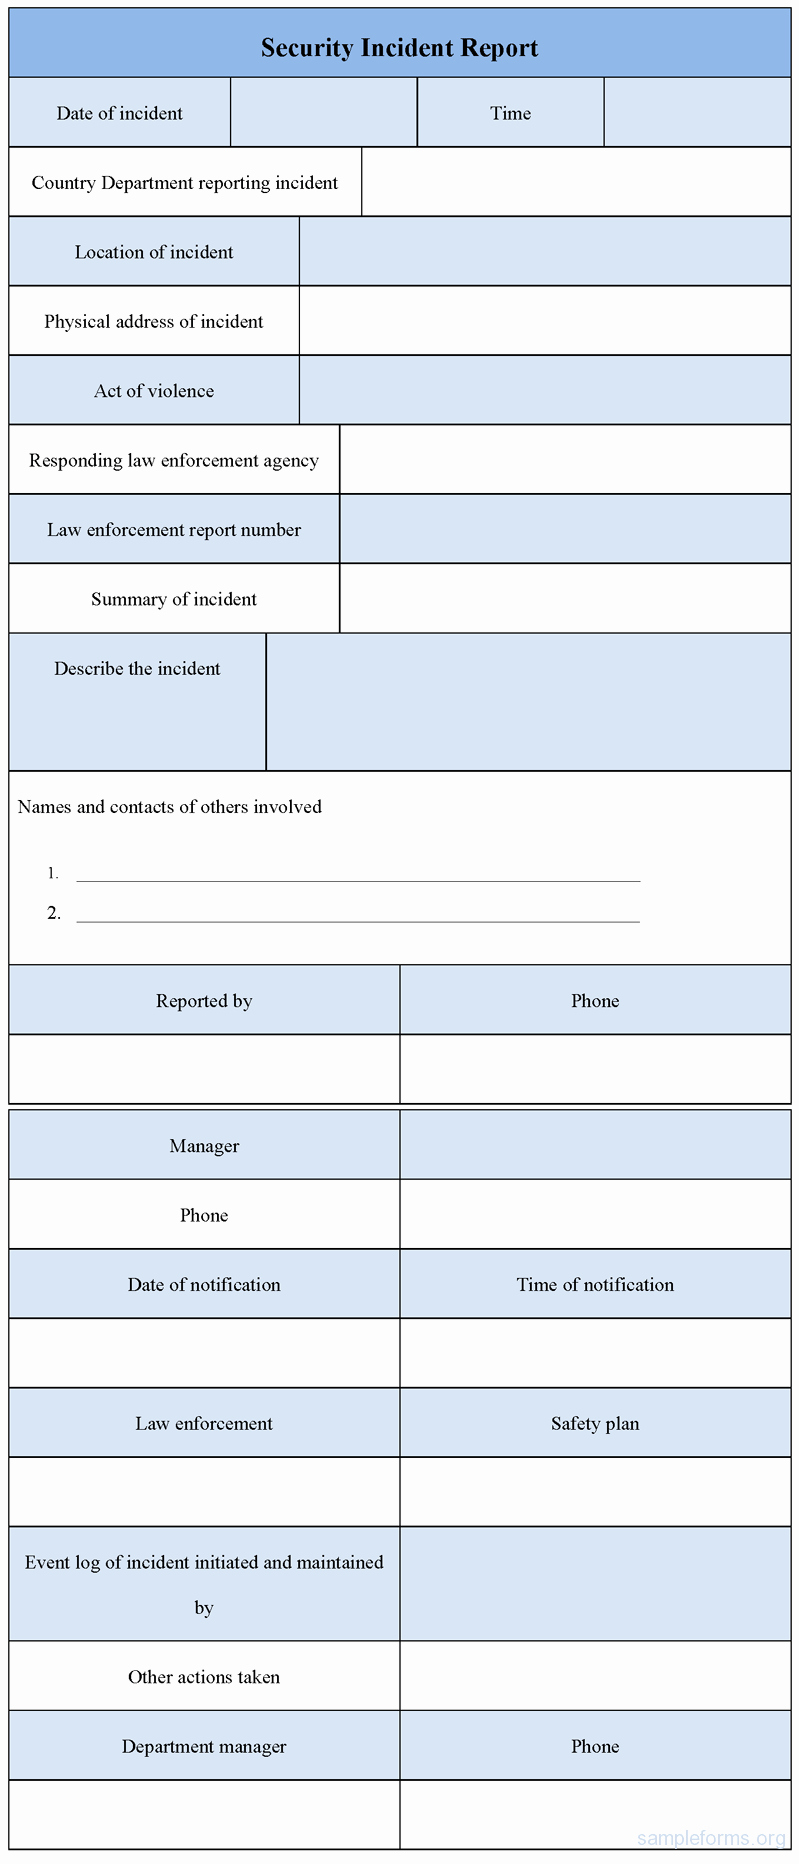 Security Incident Report Template Word Luxury Security Incident Report form Sample forms